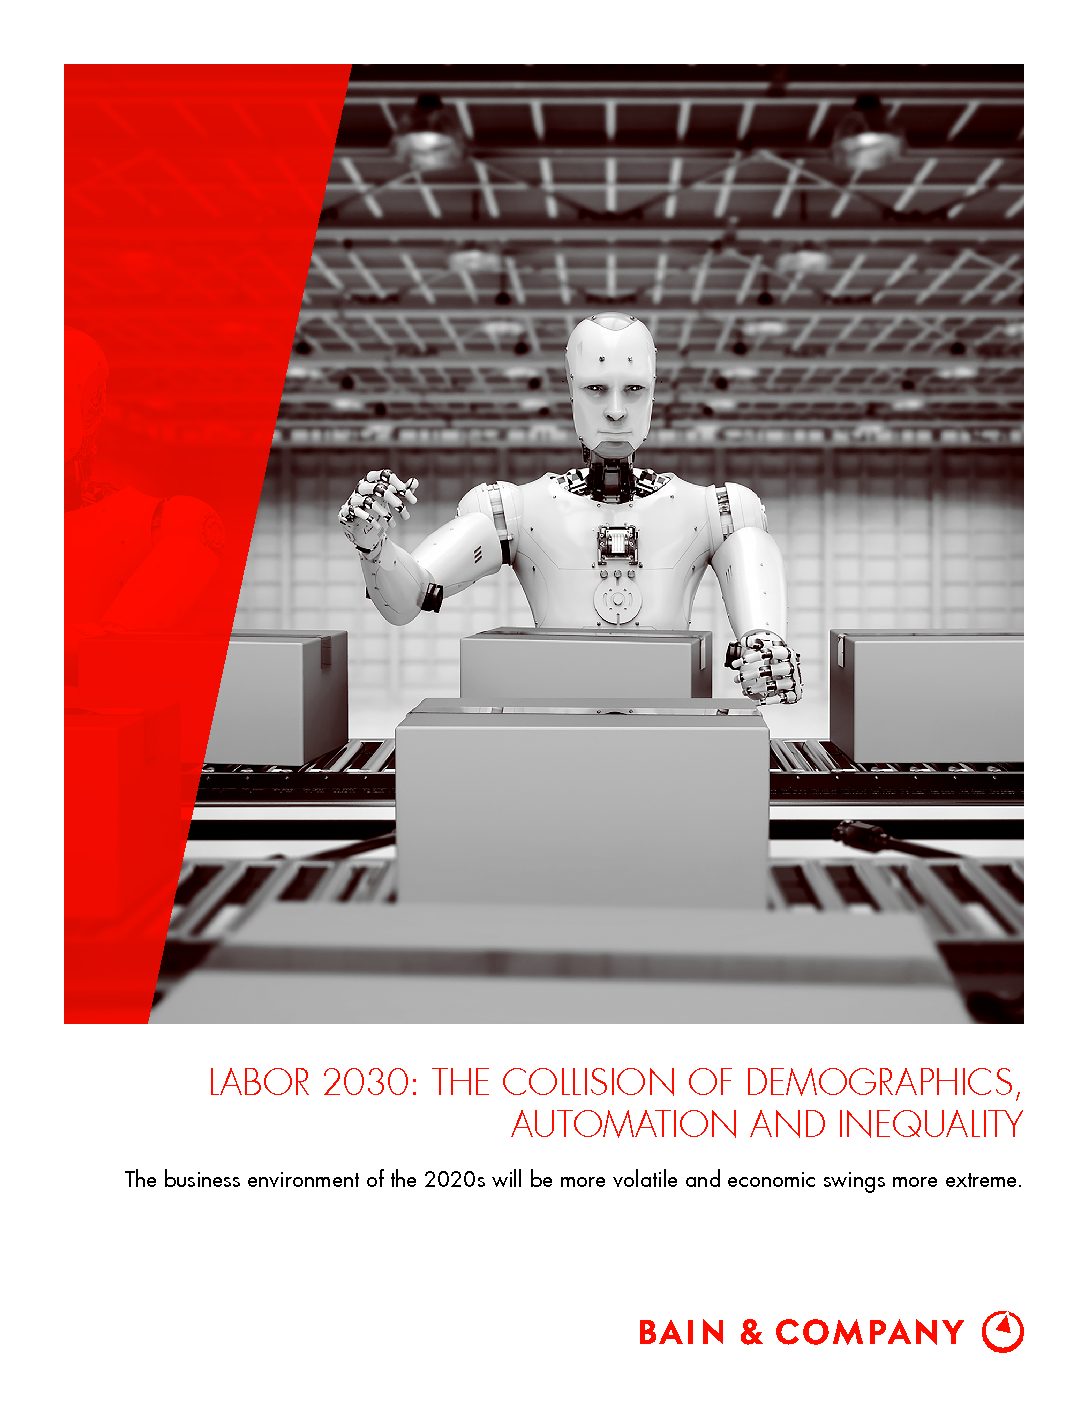 Labor 2030: The Collision of Demographics, Automation and Inequality